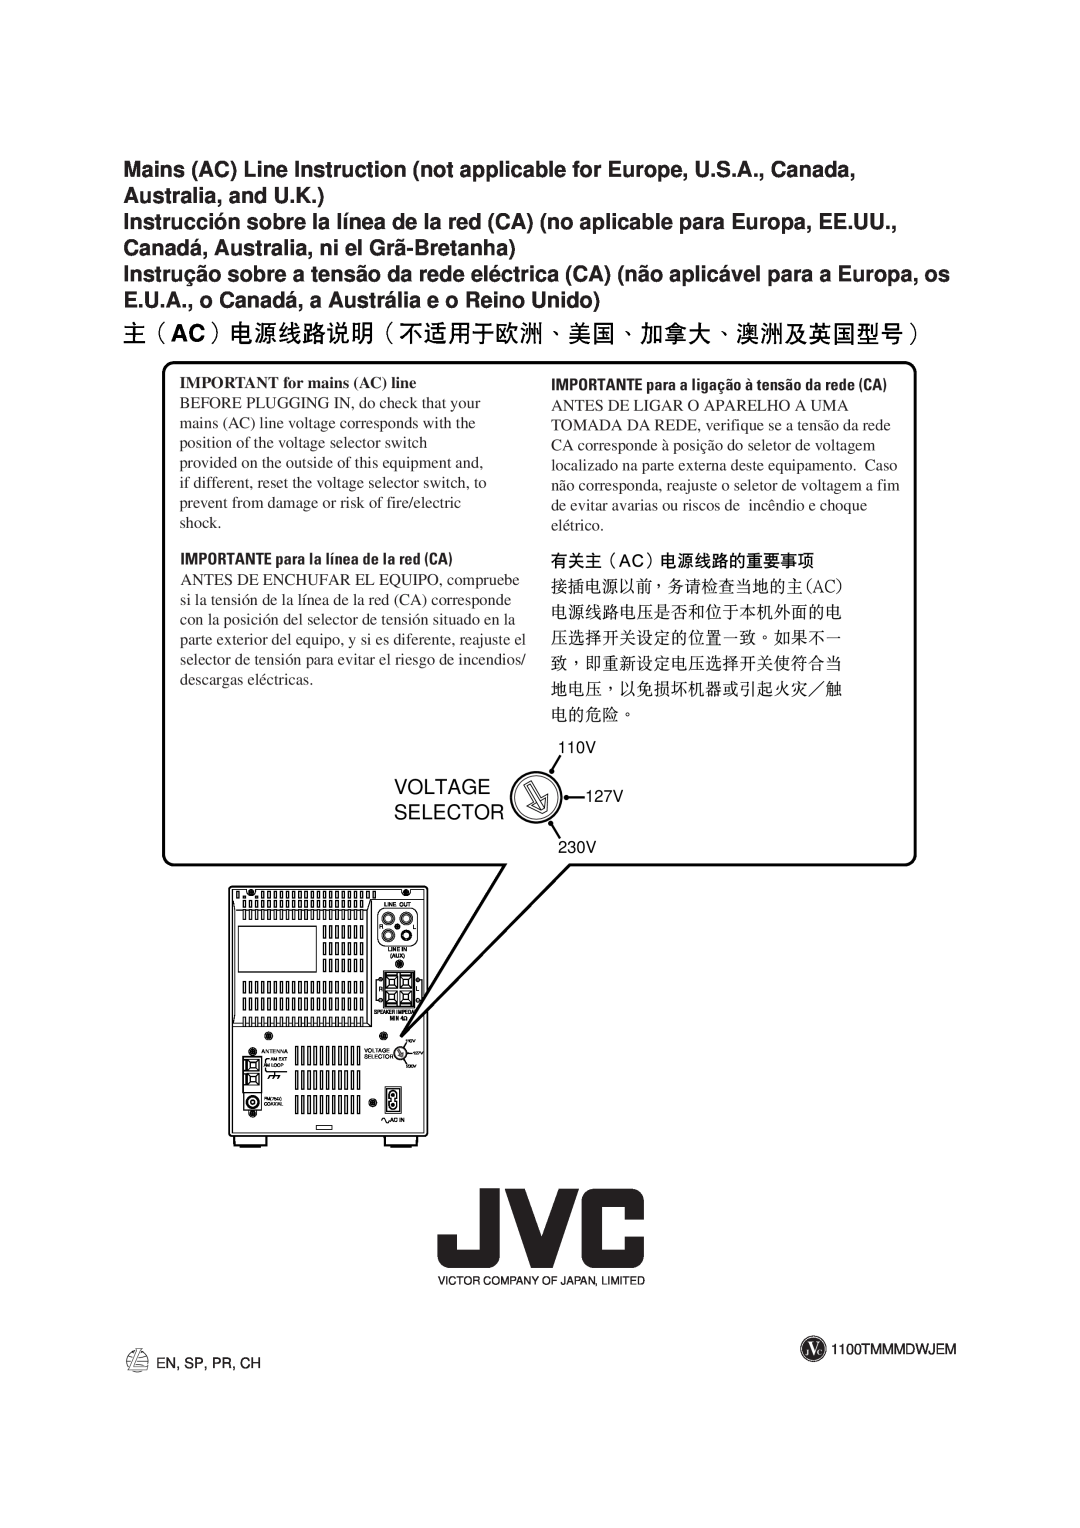 JVC UX-A70MD manual VOLTAGE 127V SELECTOR, IMPORTANT for mains AC line 